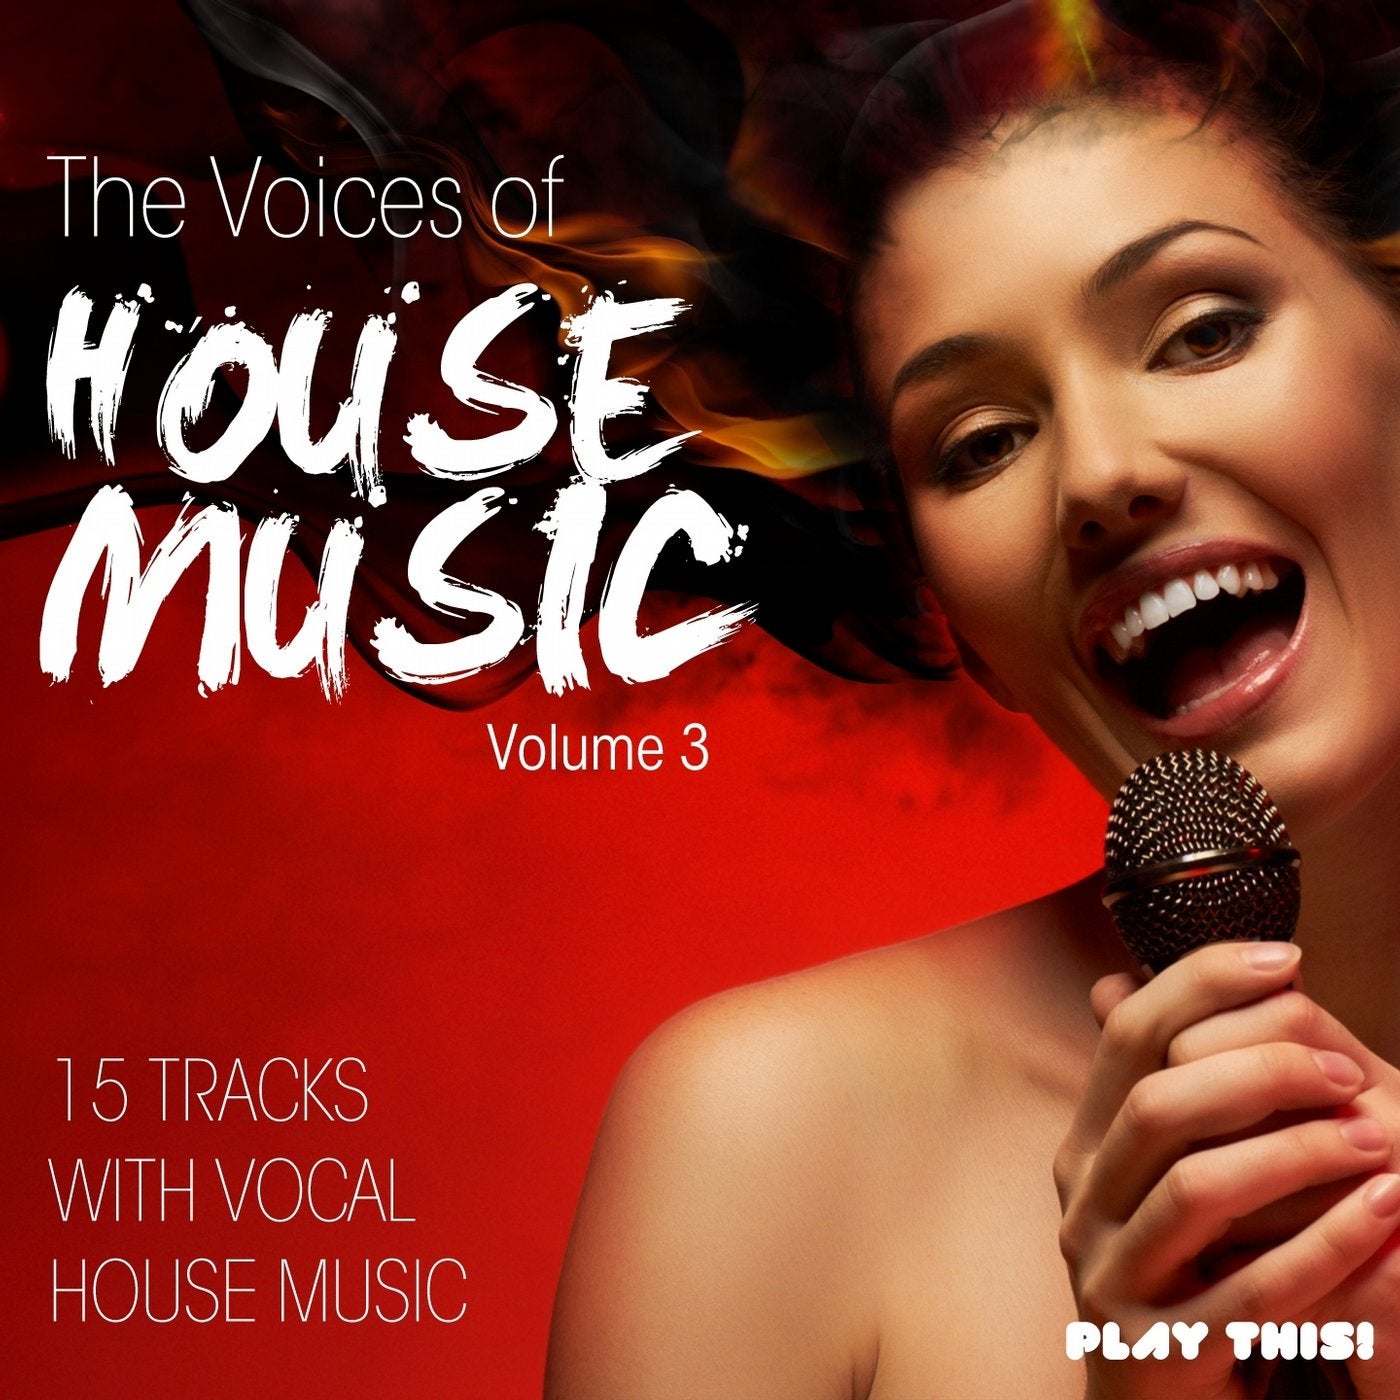 The Voices of House Music, Vol. 3 (15 Tracks with Vocal House Music)